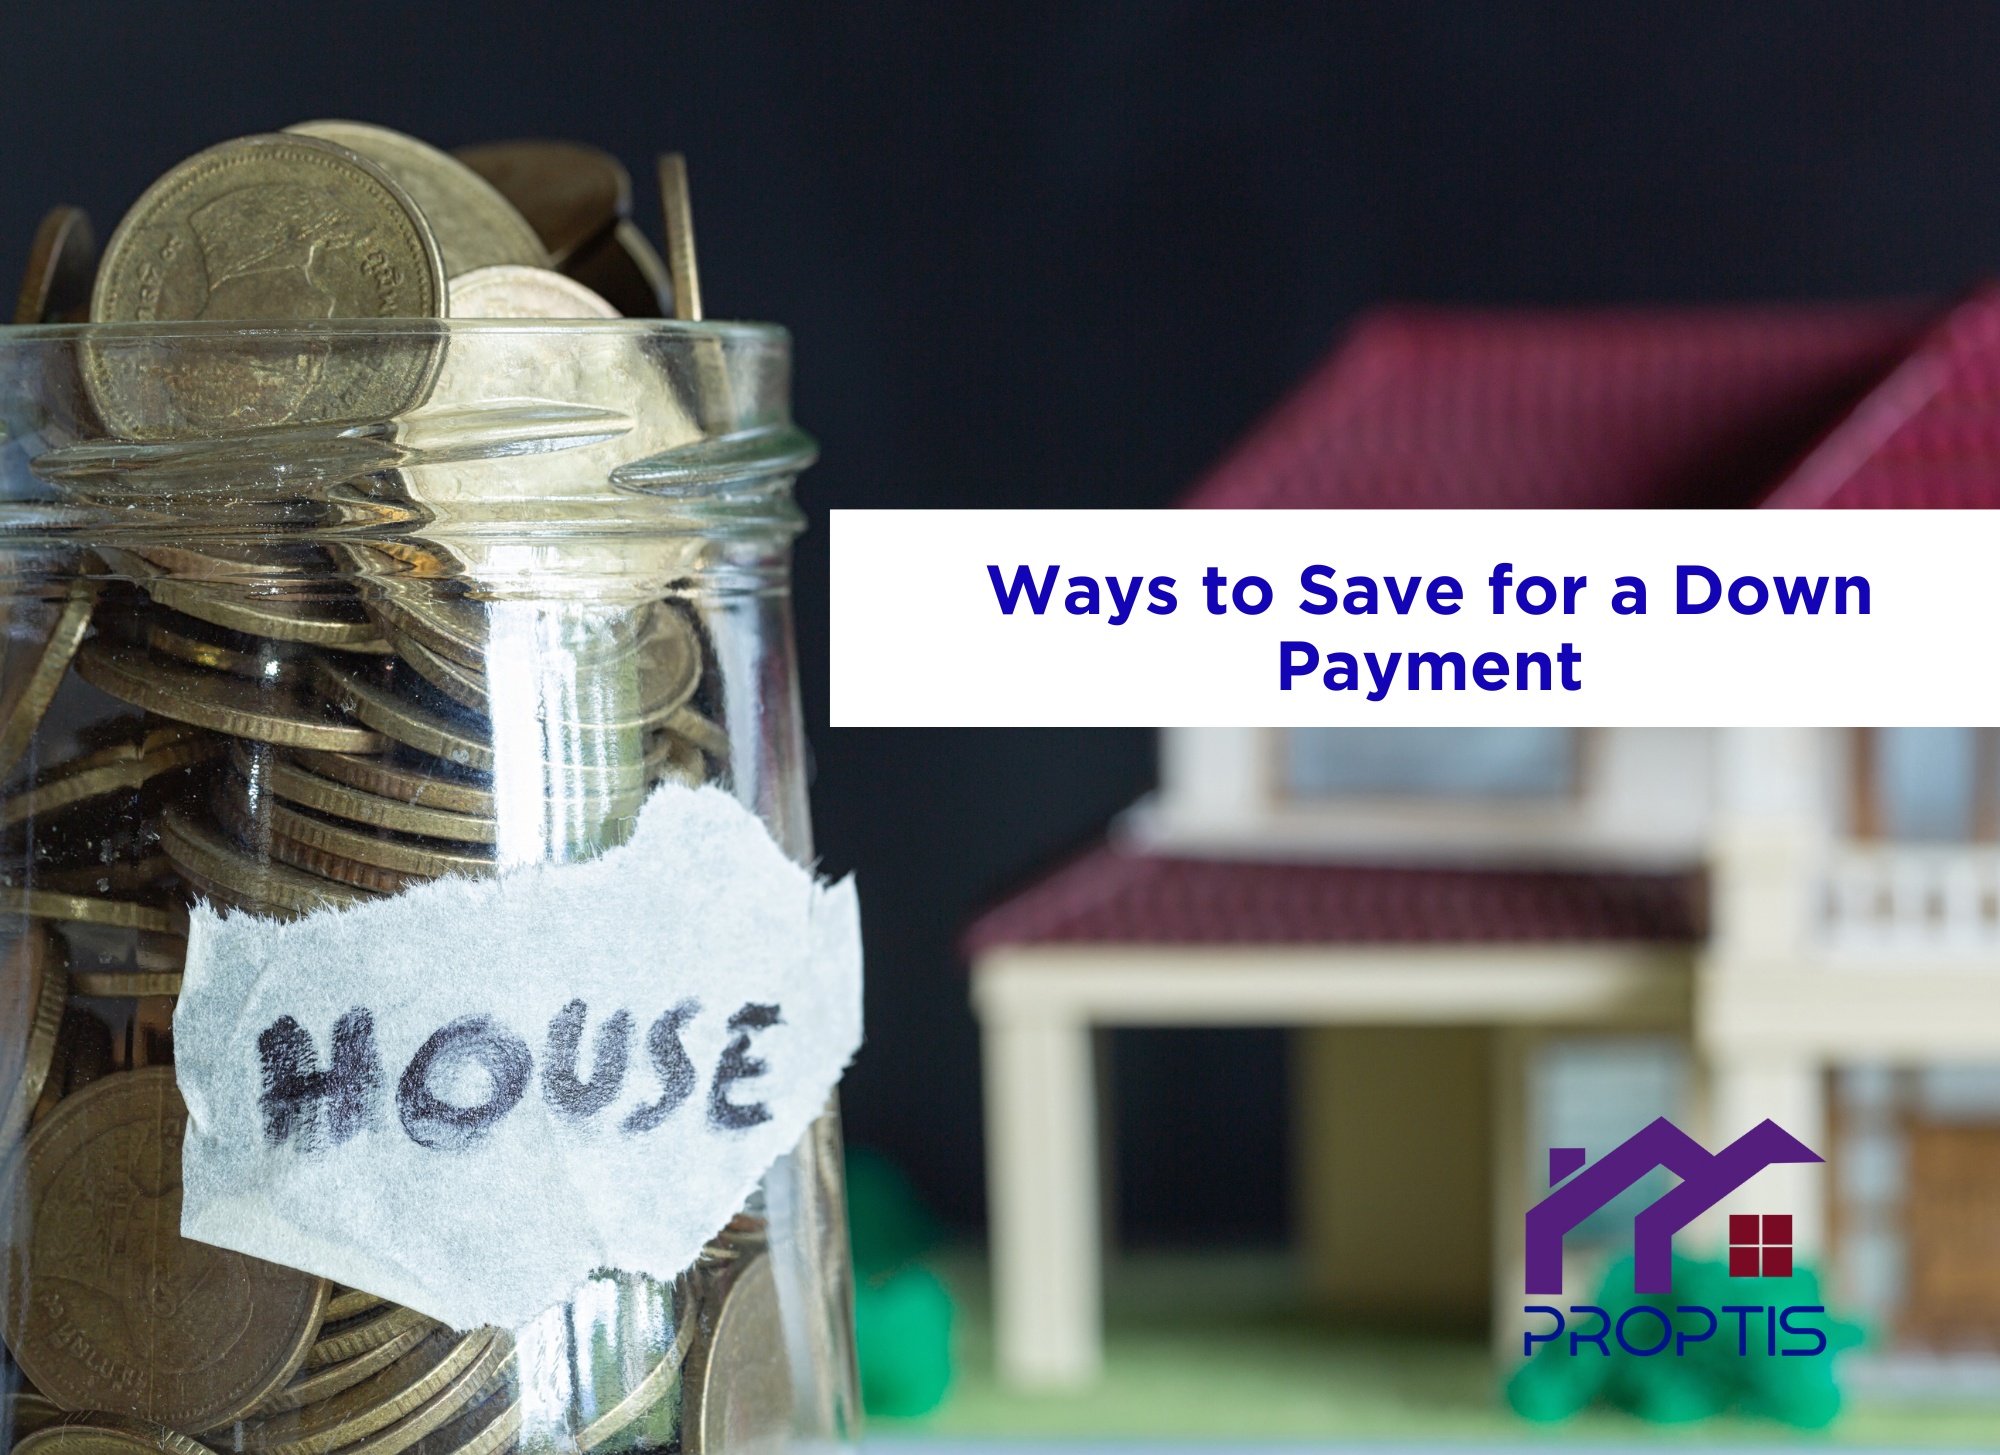 Ways to Save for a Down Payment